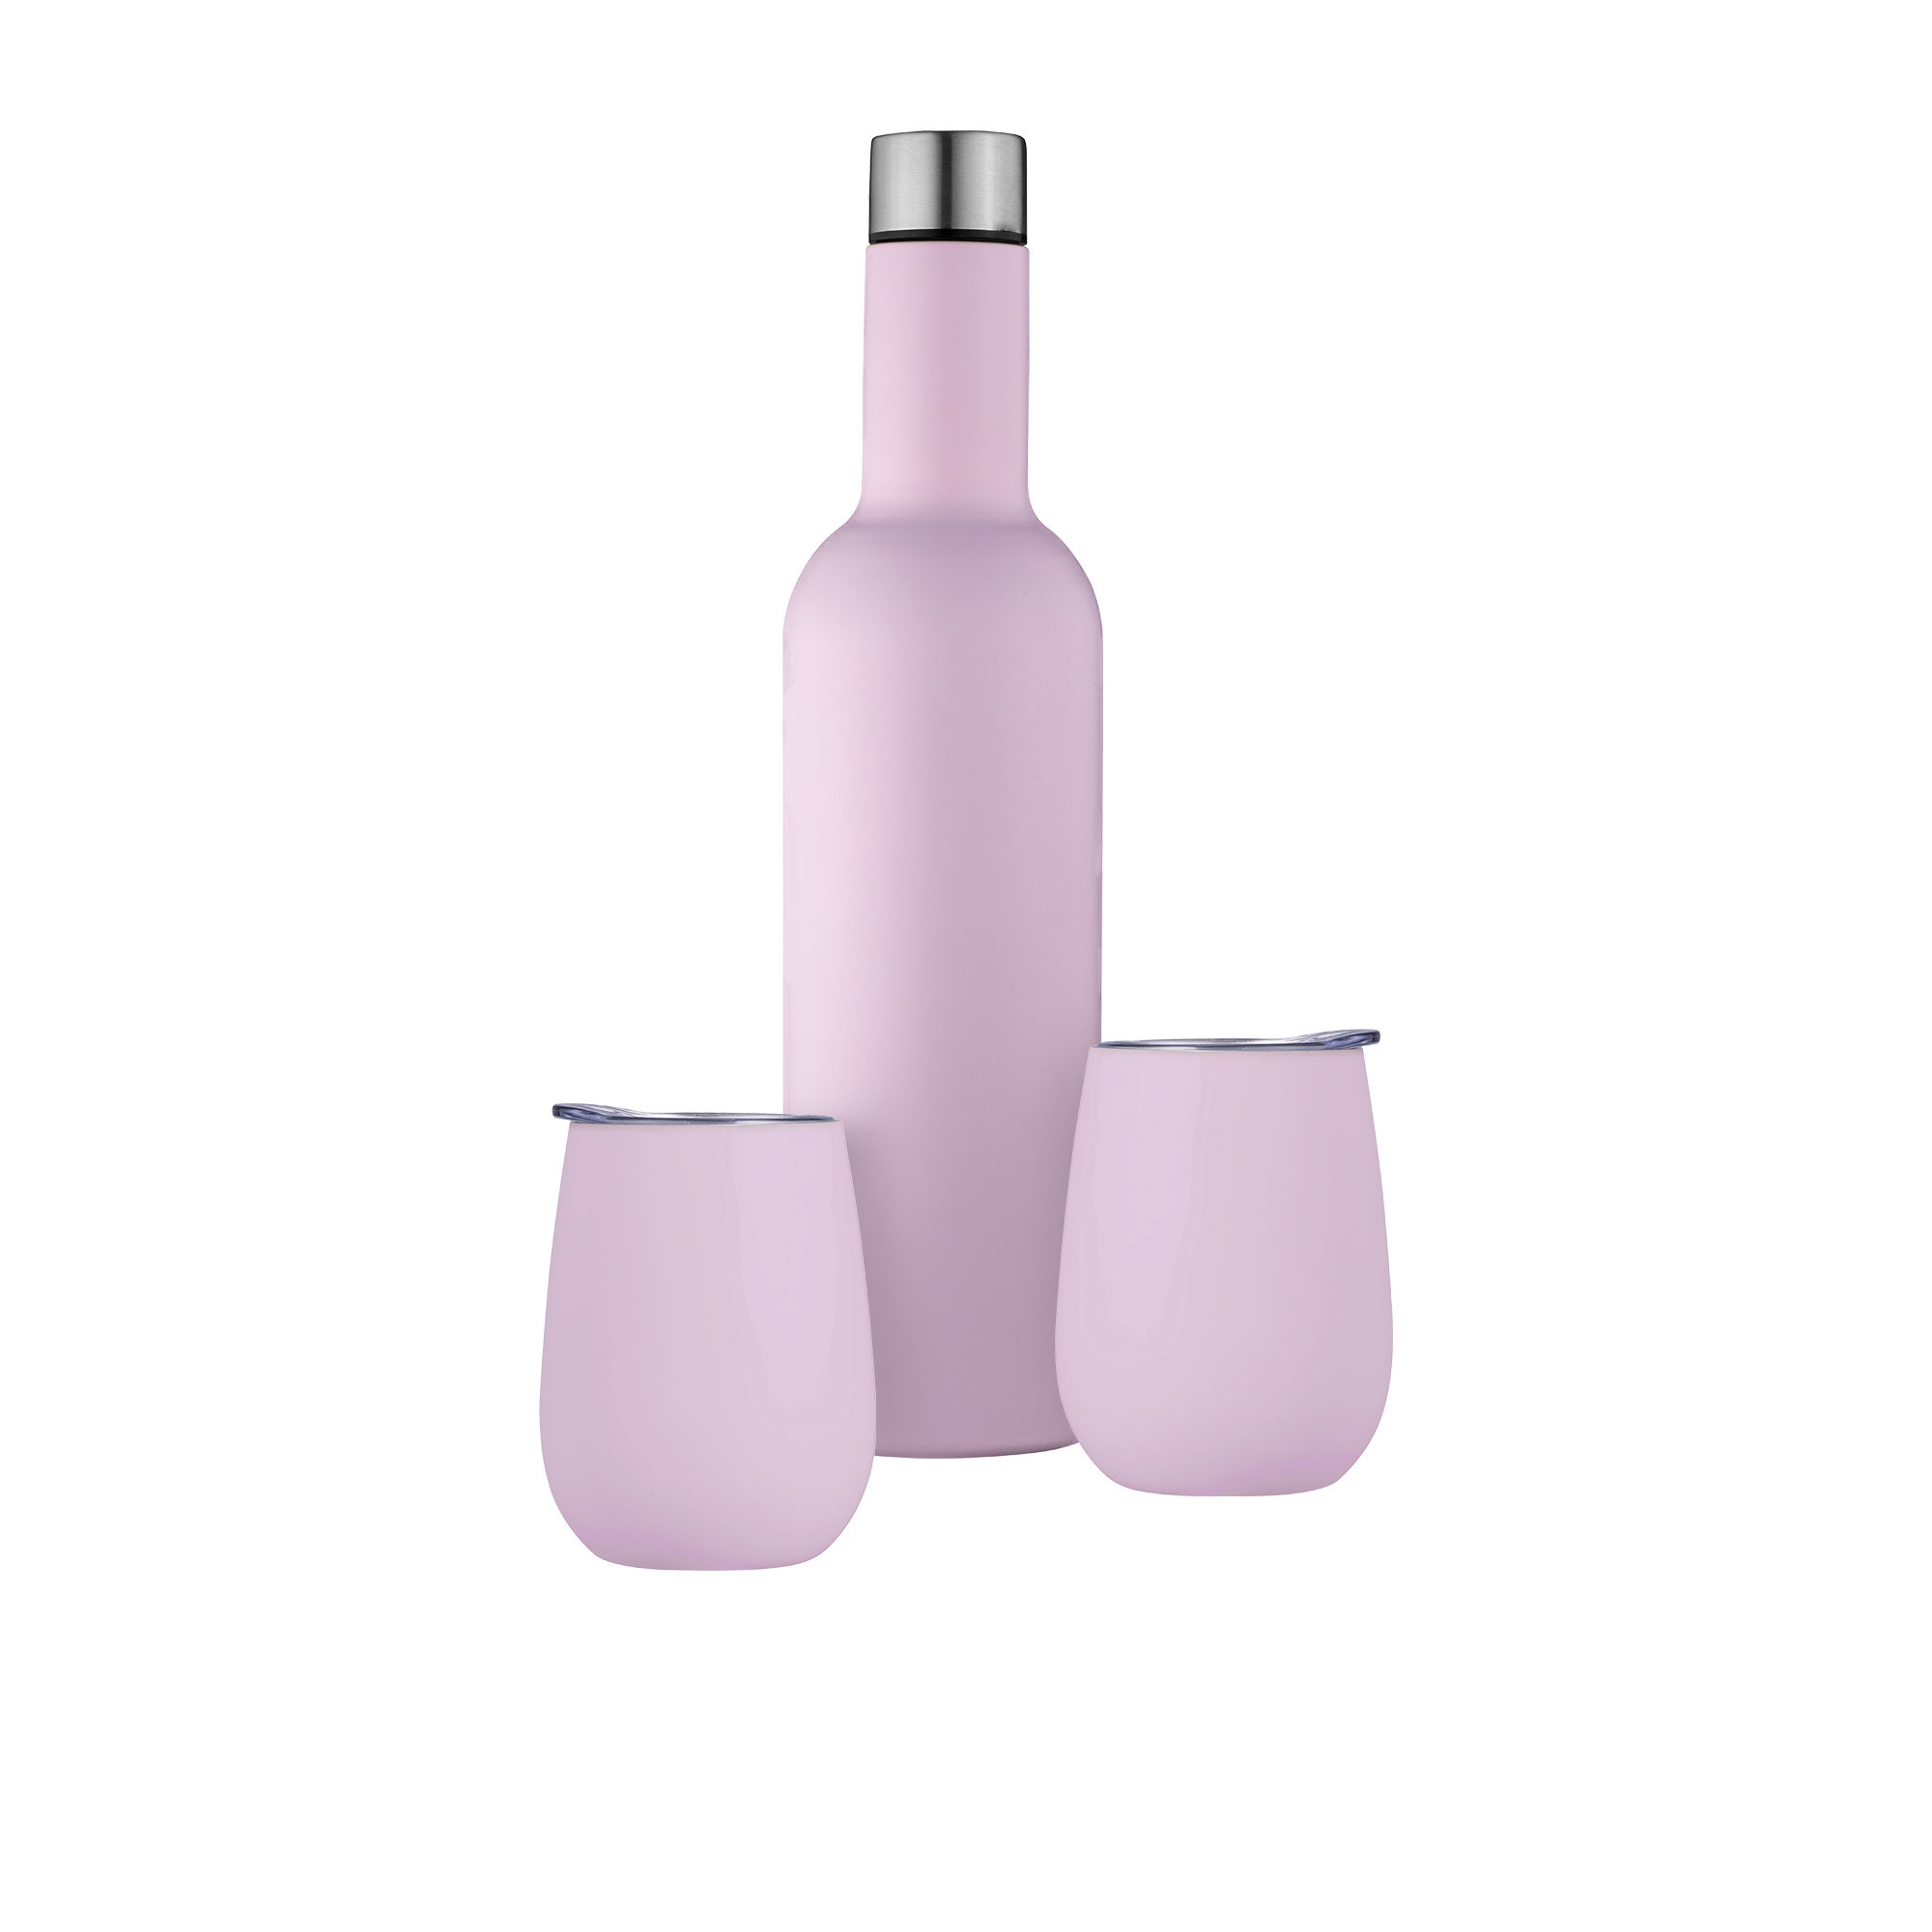 Avanti Double Wall Insulated Wine Traveller Set 3pc Pink Image 1